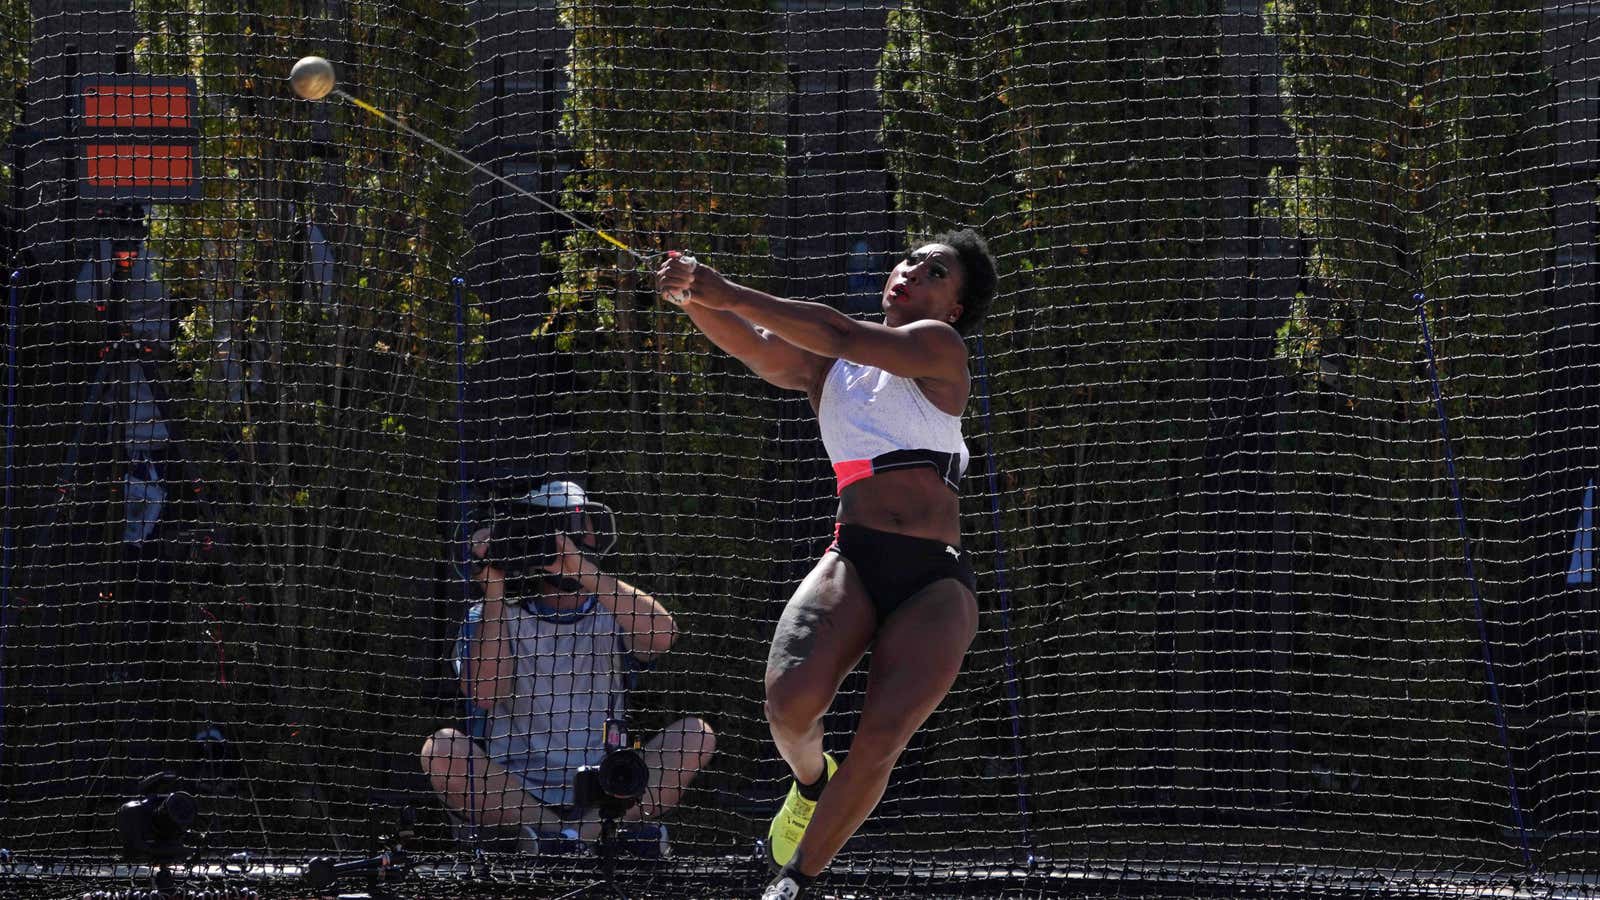 Where do pole vaulting, the triple jump and the hammer come from?